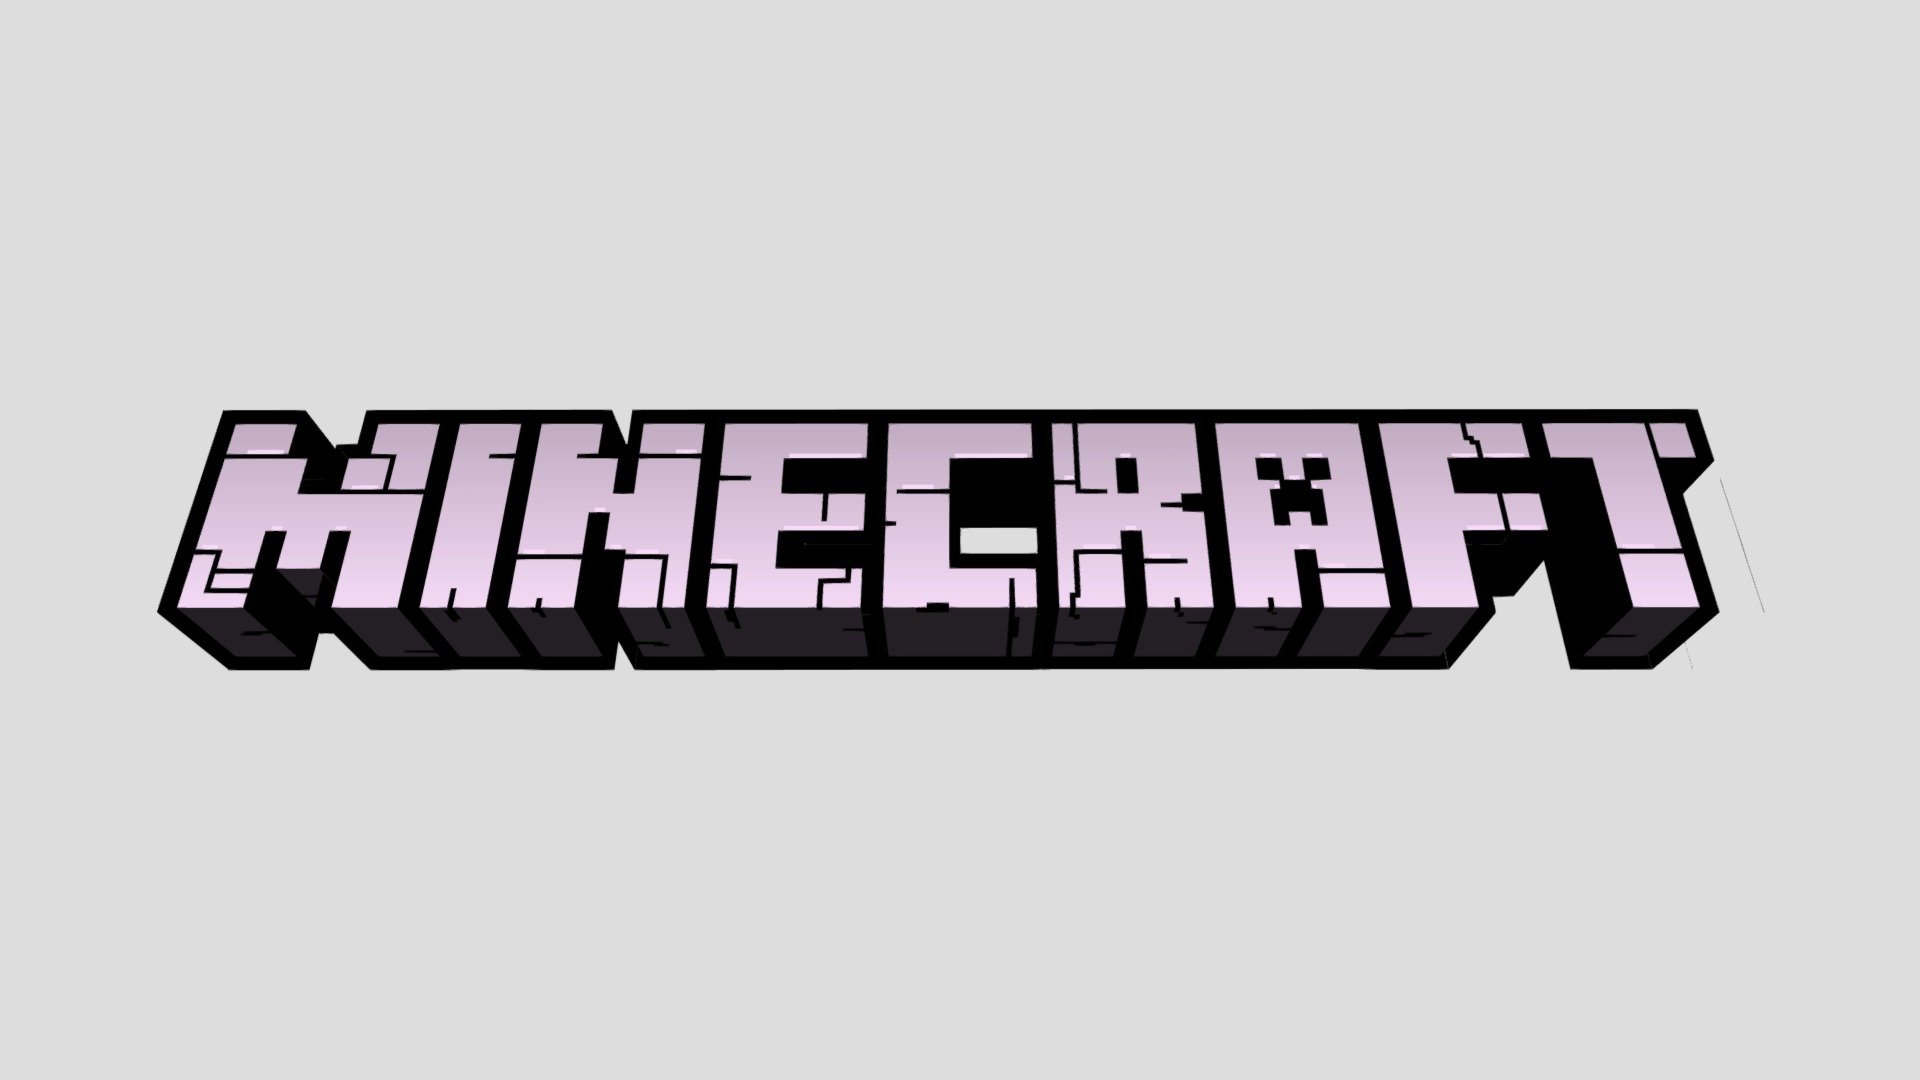 3d model of a logo from game Minecraft. For Unity, Blender, etc. This model is made by me and distributed for free! - Minecraft Logo - Download Free 3D model by Frog (@RecodorYT) 3d model